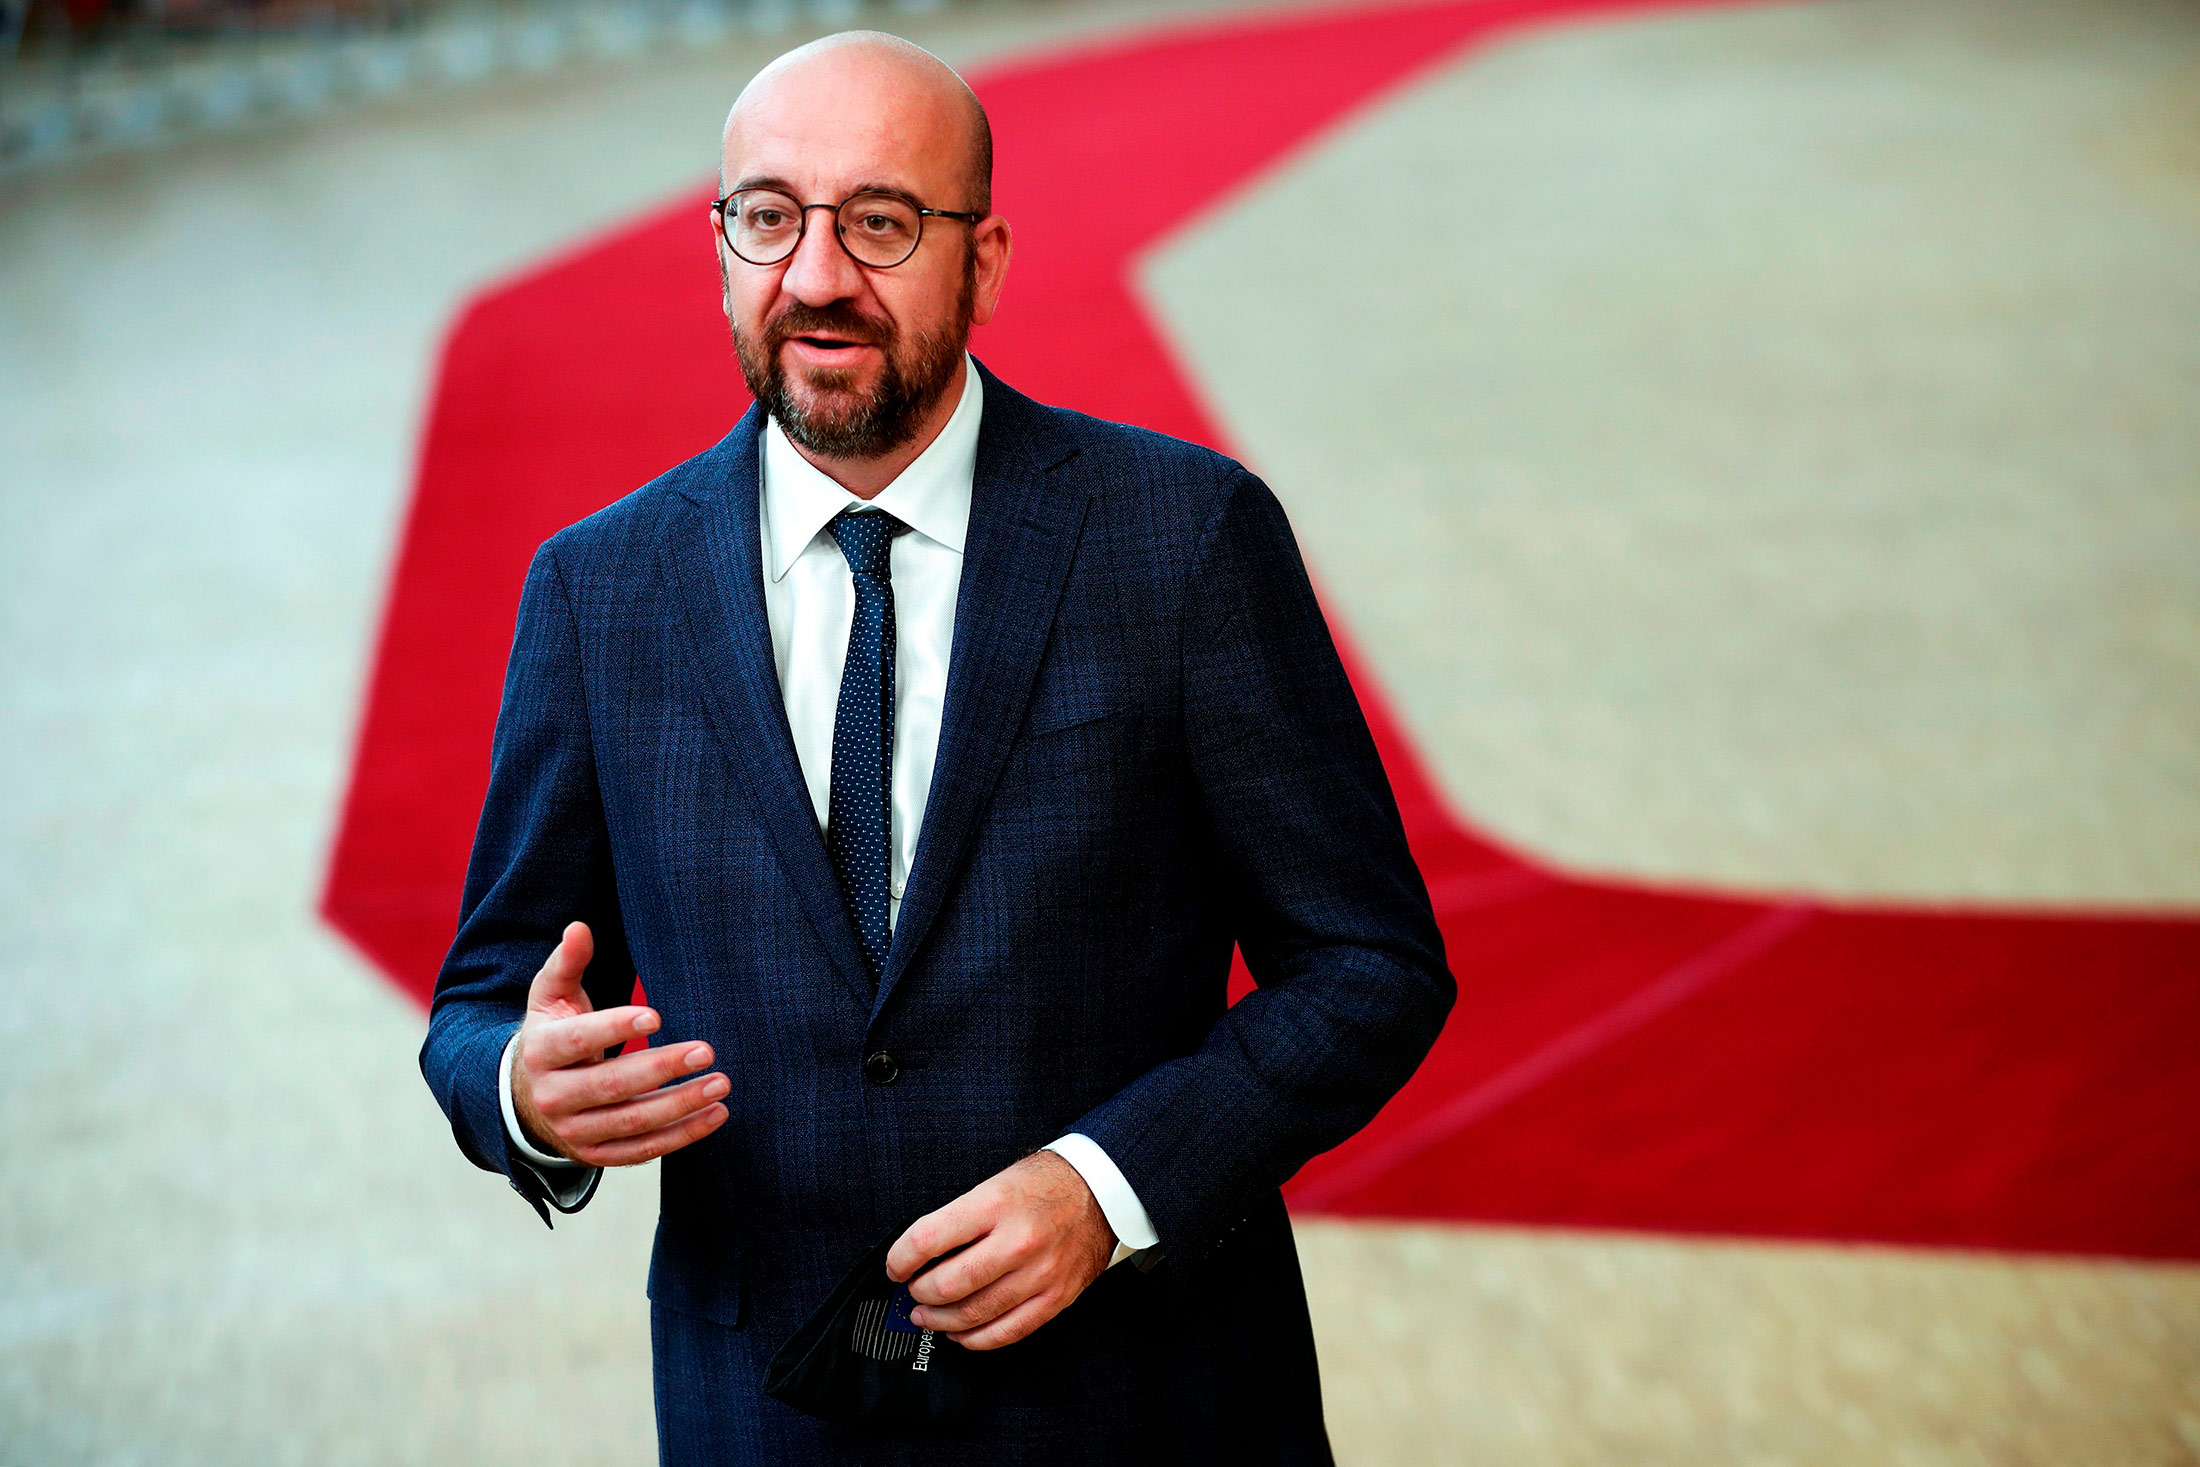 European Council President Charles Michel makes a statement prior to a round table meeting at an EU summit in Brussels on July 20.